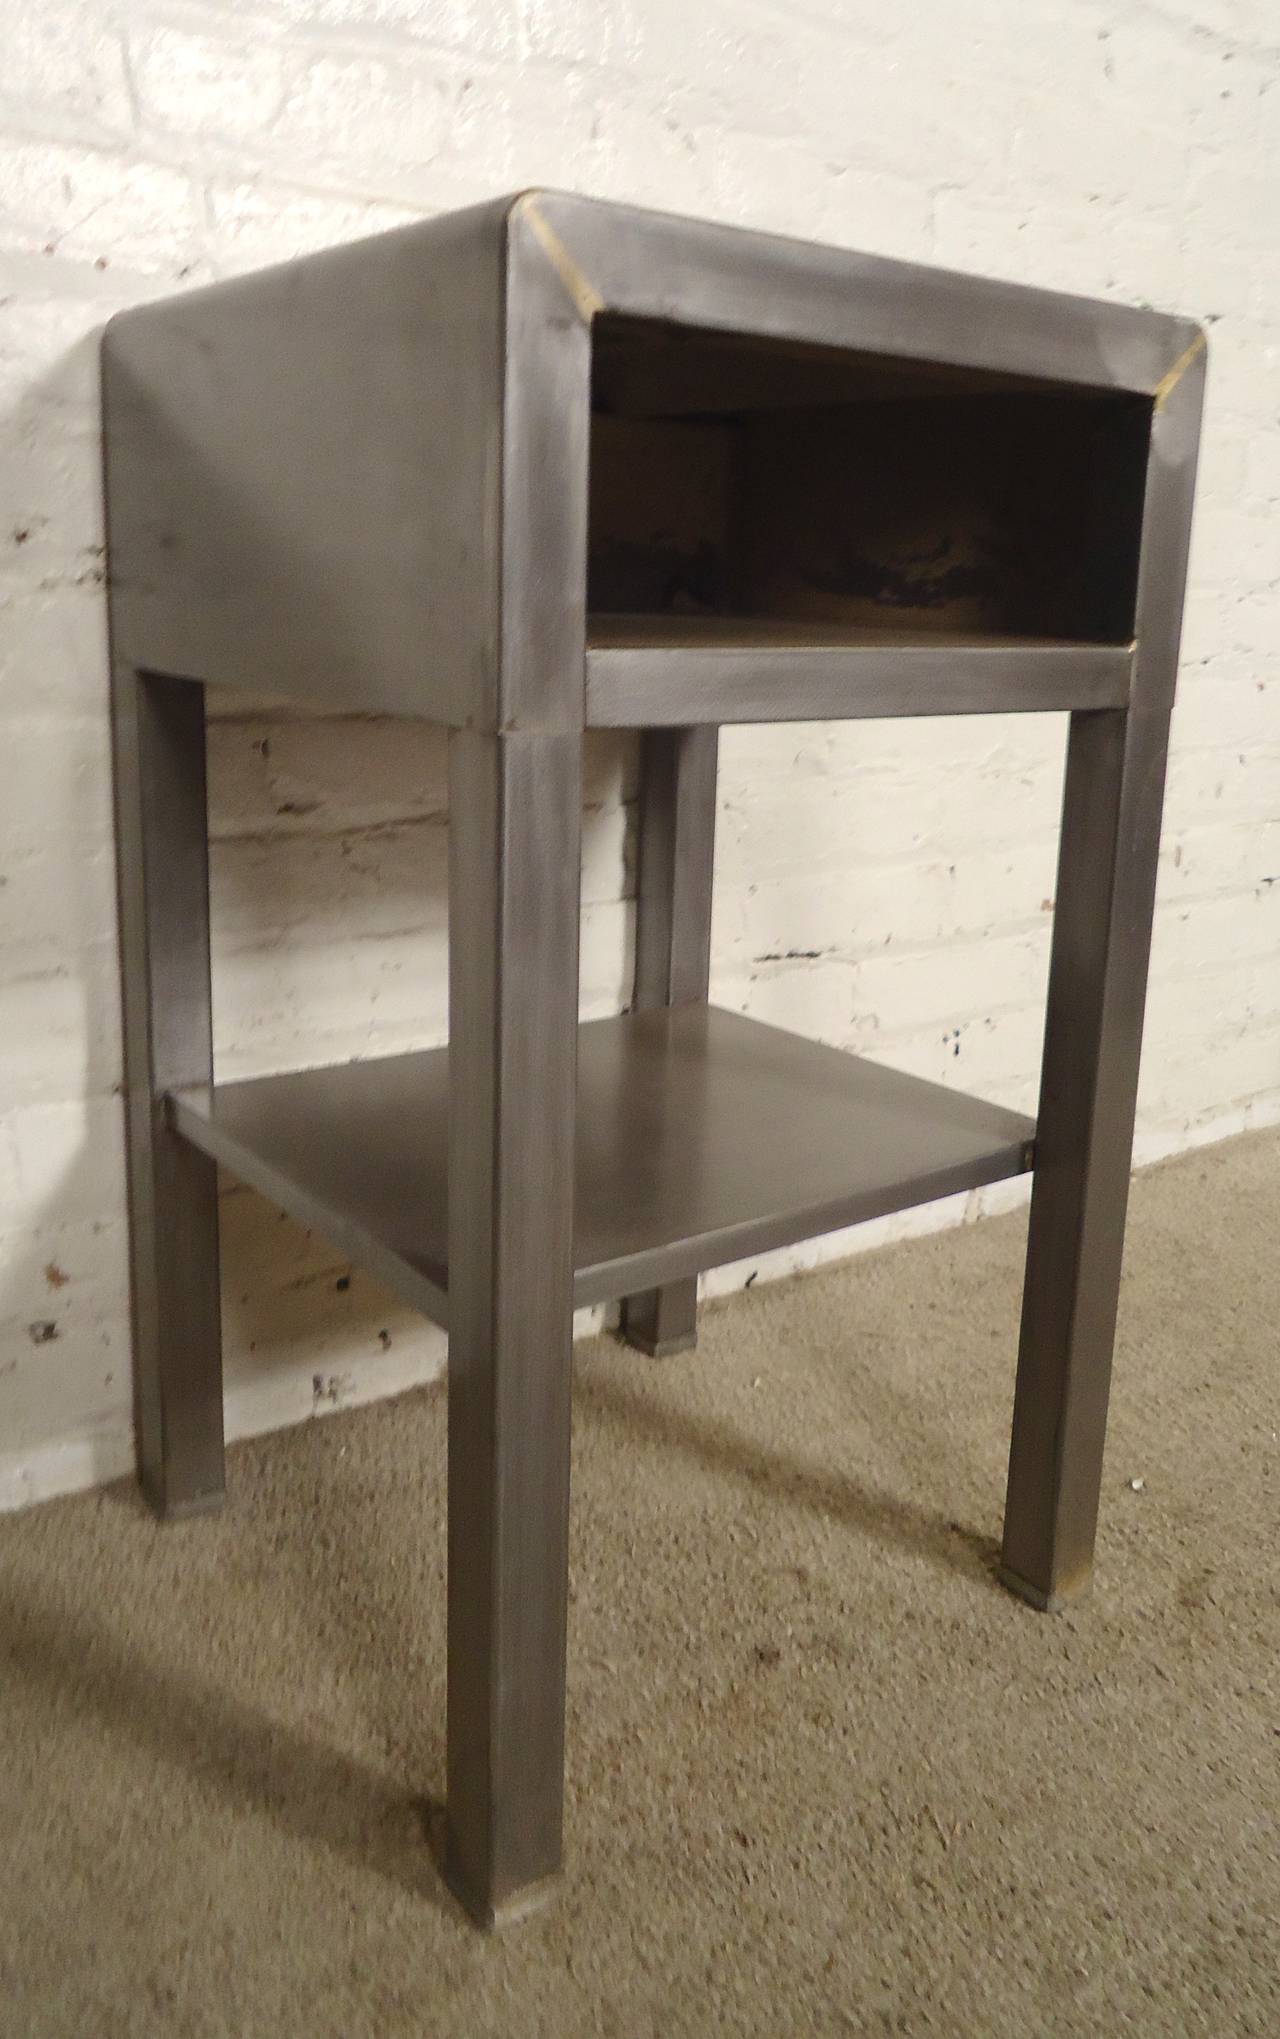 Vintage modern bedside table designed by Norman Bel Geddes. Stripped metal style, giving a handsome look to your sofa table, nightstand, or even as a bathroom table.

(Please confirm item location - NY or NJ - with dealer)